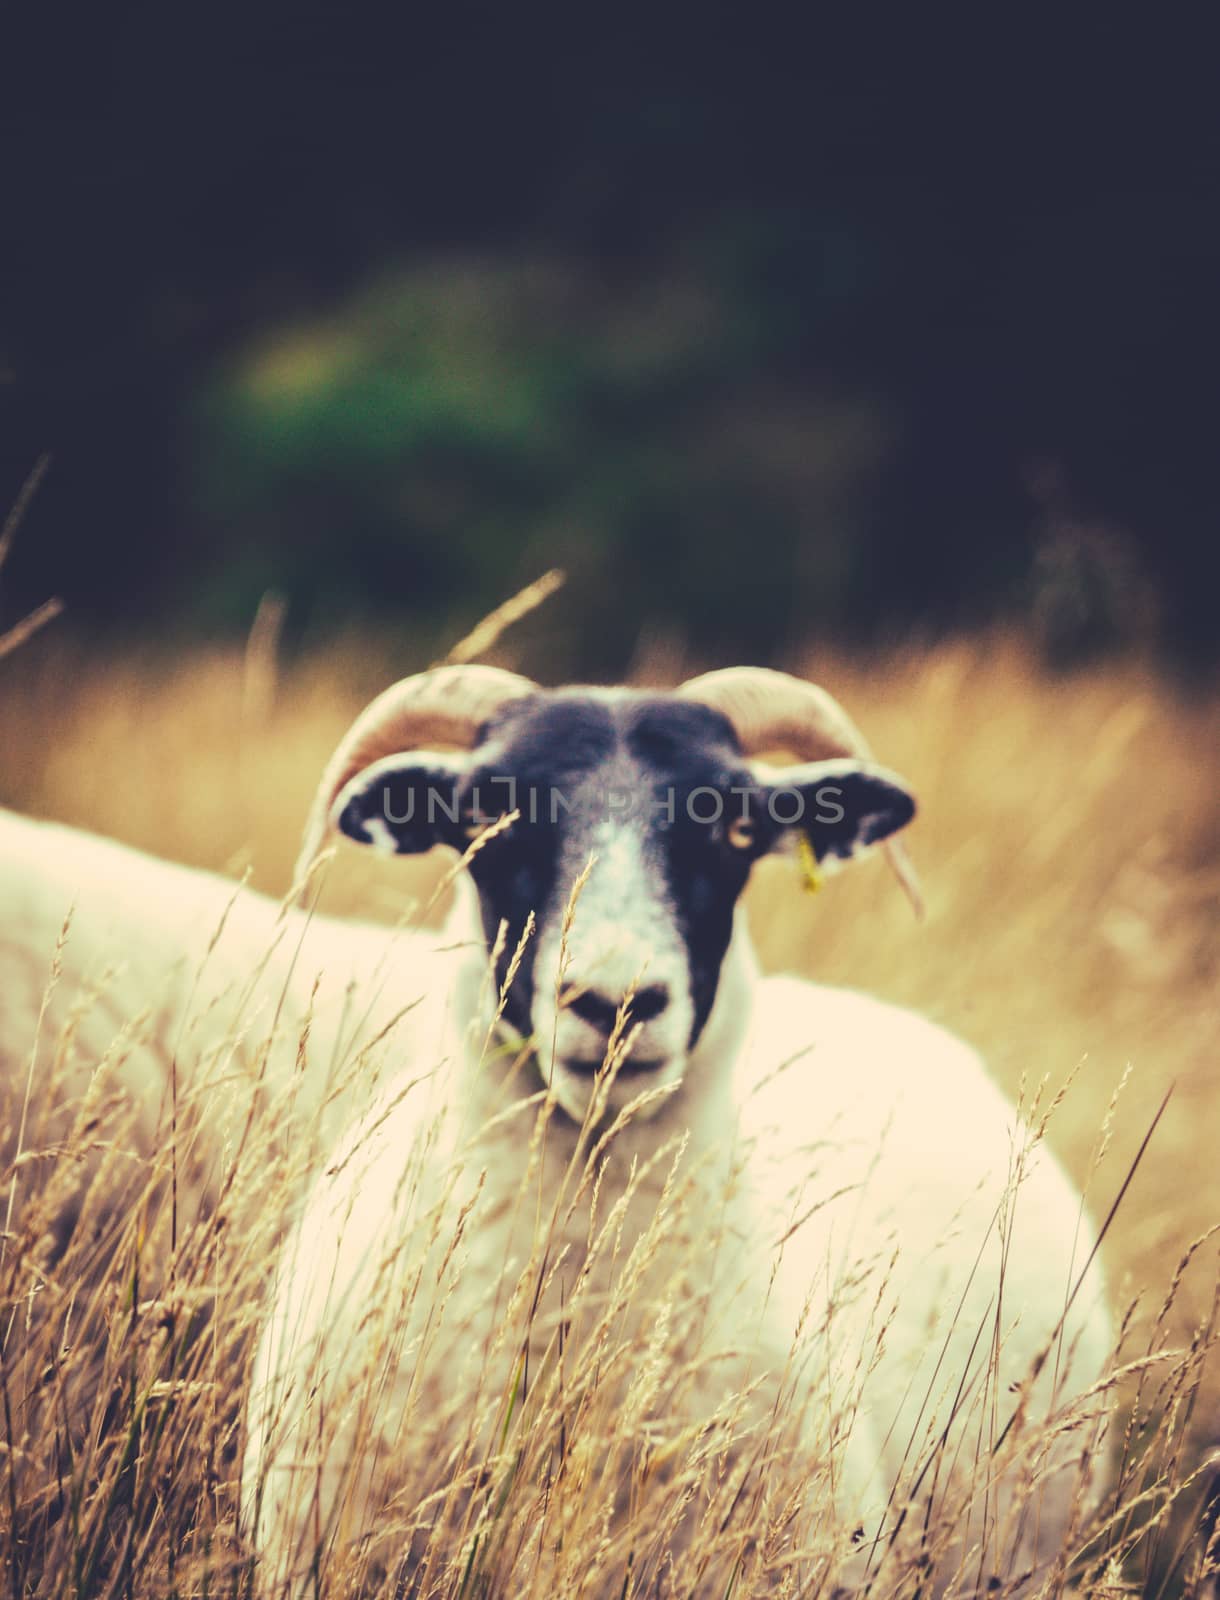 Retro Filtered Image Of A Scottish Blackface Sheep With The Focus On Grass In The Foreground With Copy Space